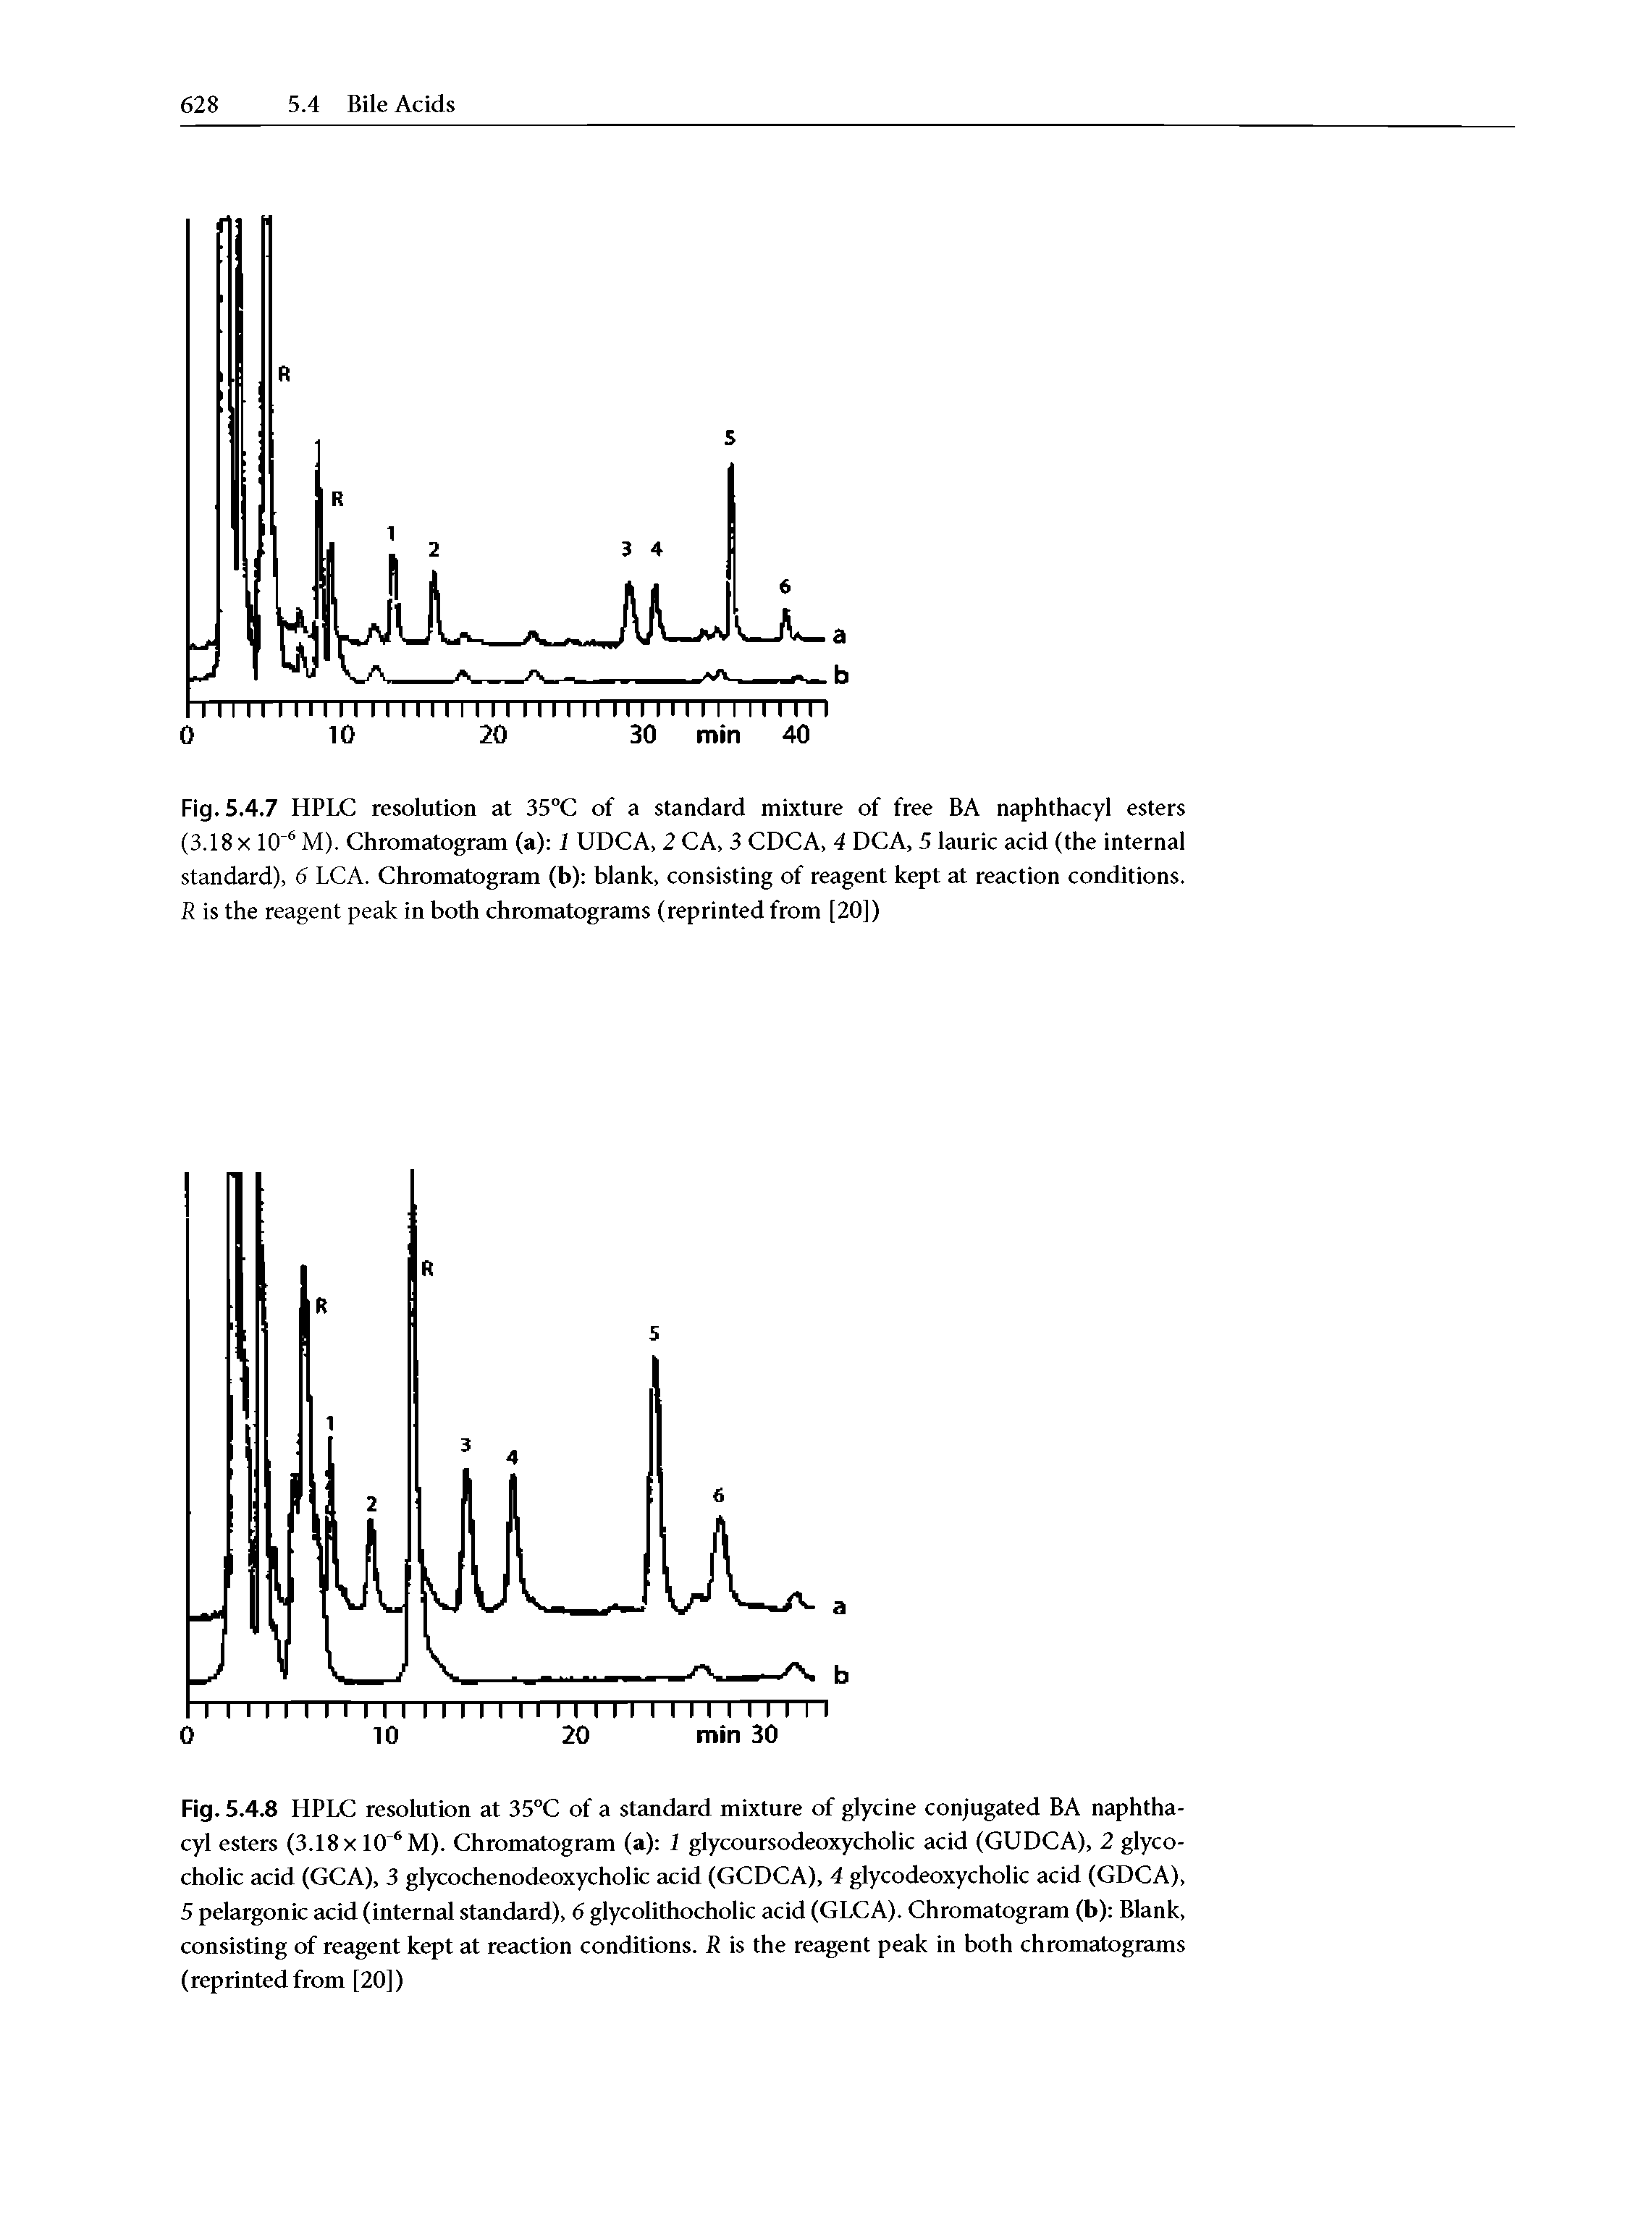 Fig. 5.4.7 HPLC resolution at 35°C of a standard mixture of free BA naphthacyl esters (3.18 x 10 6 M). Chromatogram (a) 1 UDCA, 2 CA, 3 CDCA, 4 DCA, 5 lauric acid (the internal standard), 6 LCA. Chromatogram (b) blank, consisting of reagent kept at reaction conditions. R is the reagent peak in both chromatograms (reprinted from [20])...